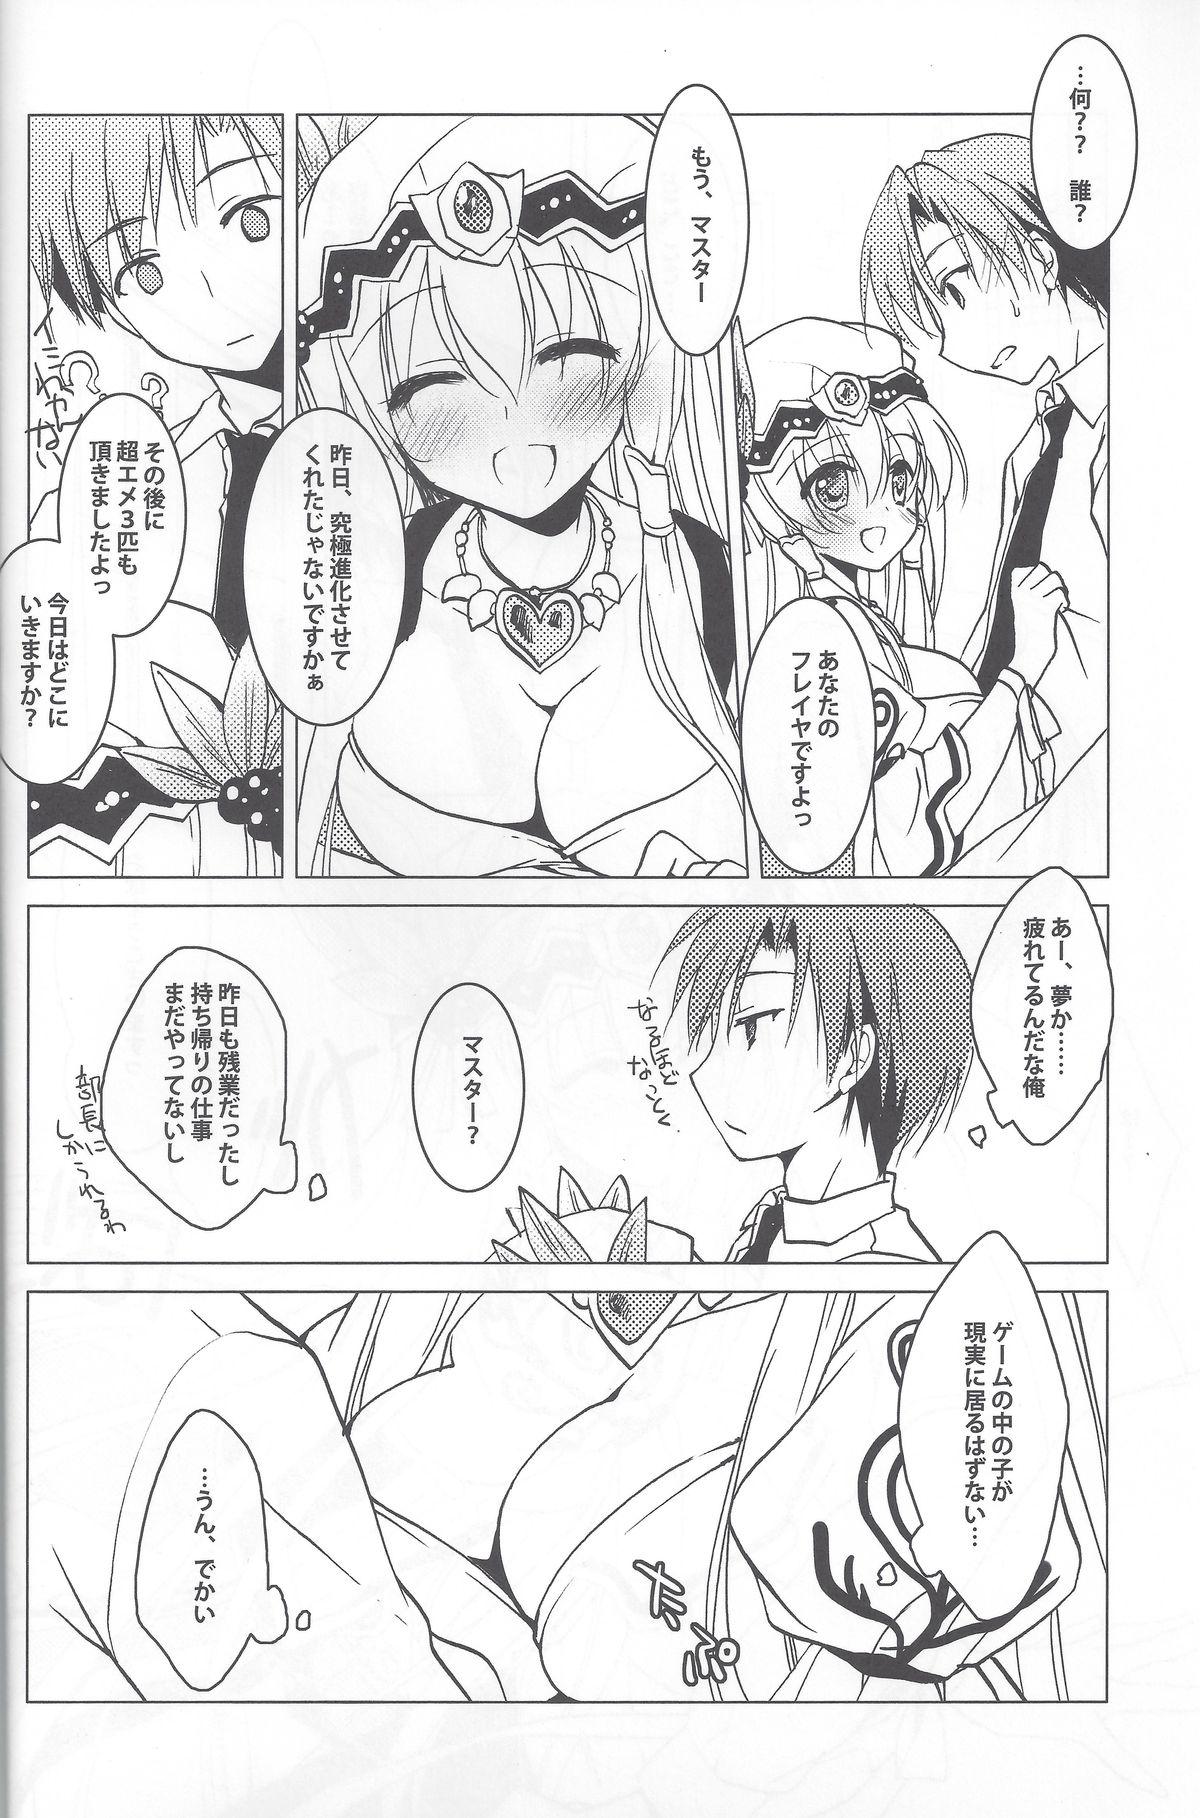 Money Talks Puz-Dorastic - Puzzle and dragons Stripping - Page 3